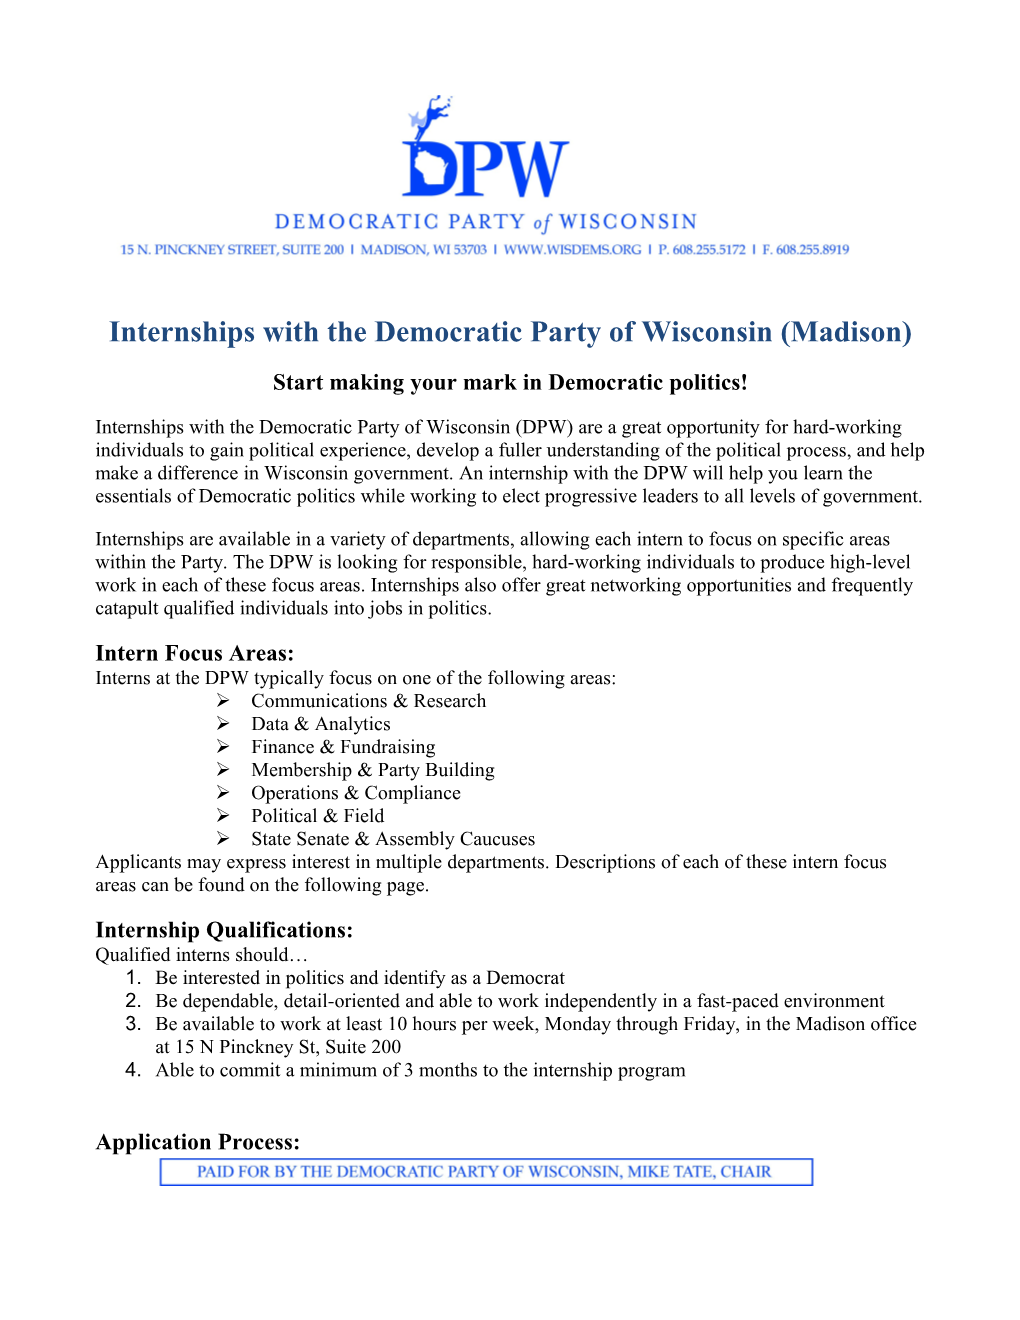 Internships with the Democratic Party of Wisconsin (Madison)